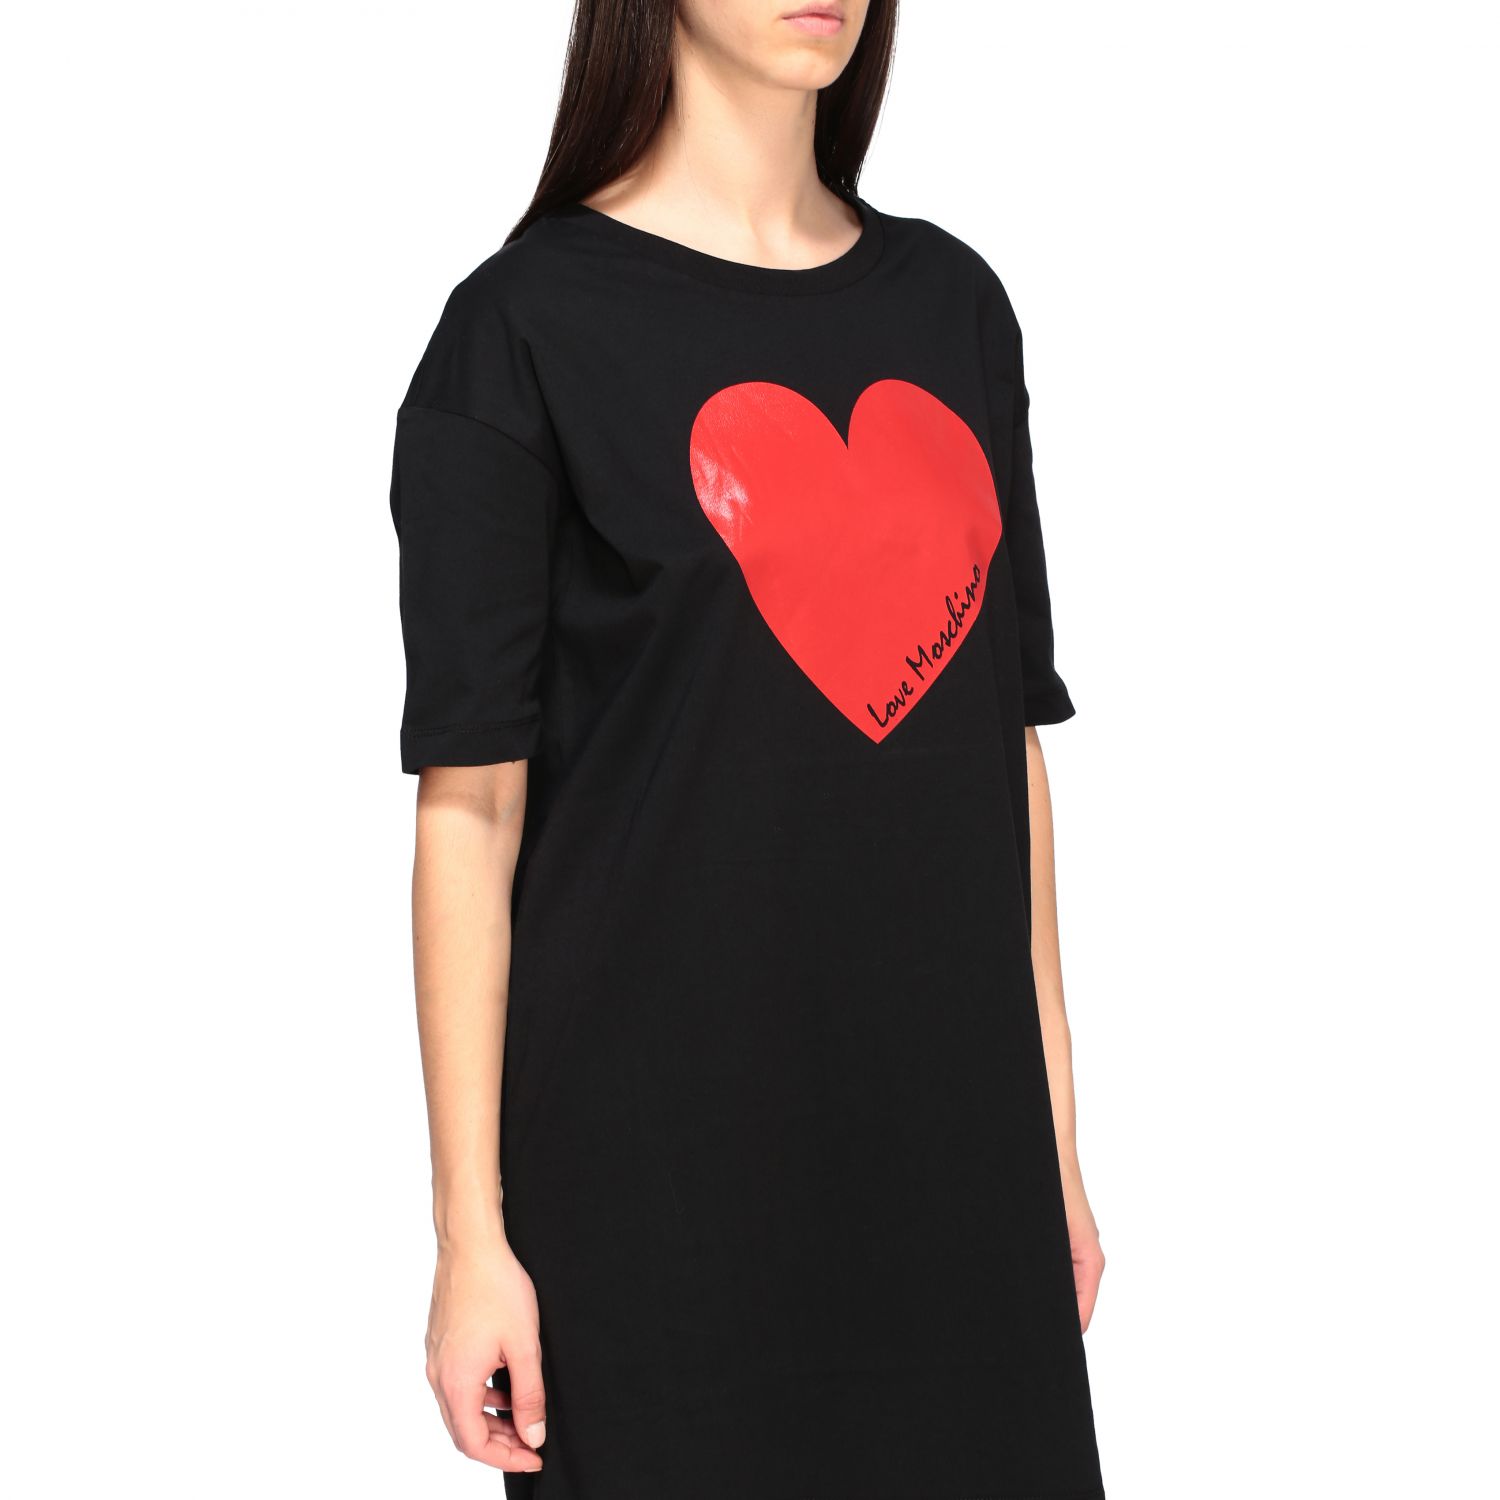 Love Moschino Outlet: t-shirt dress with maxi heart | Dress Love